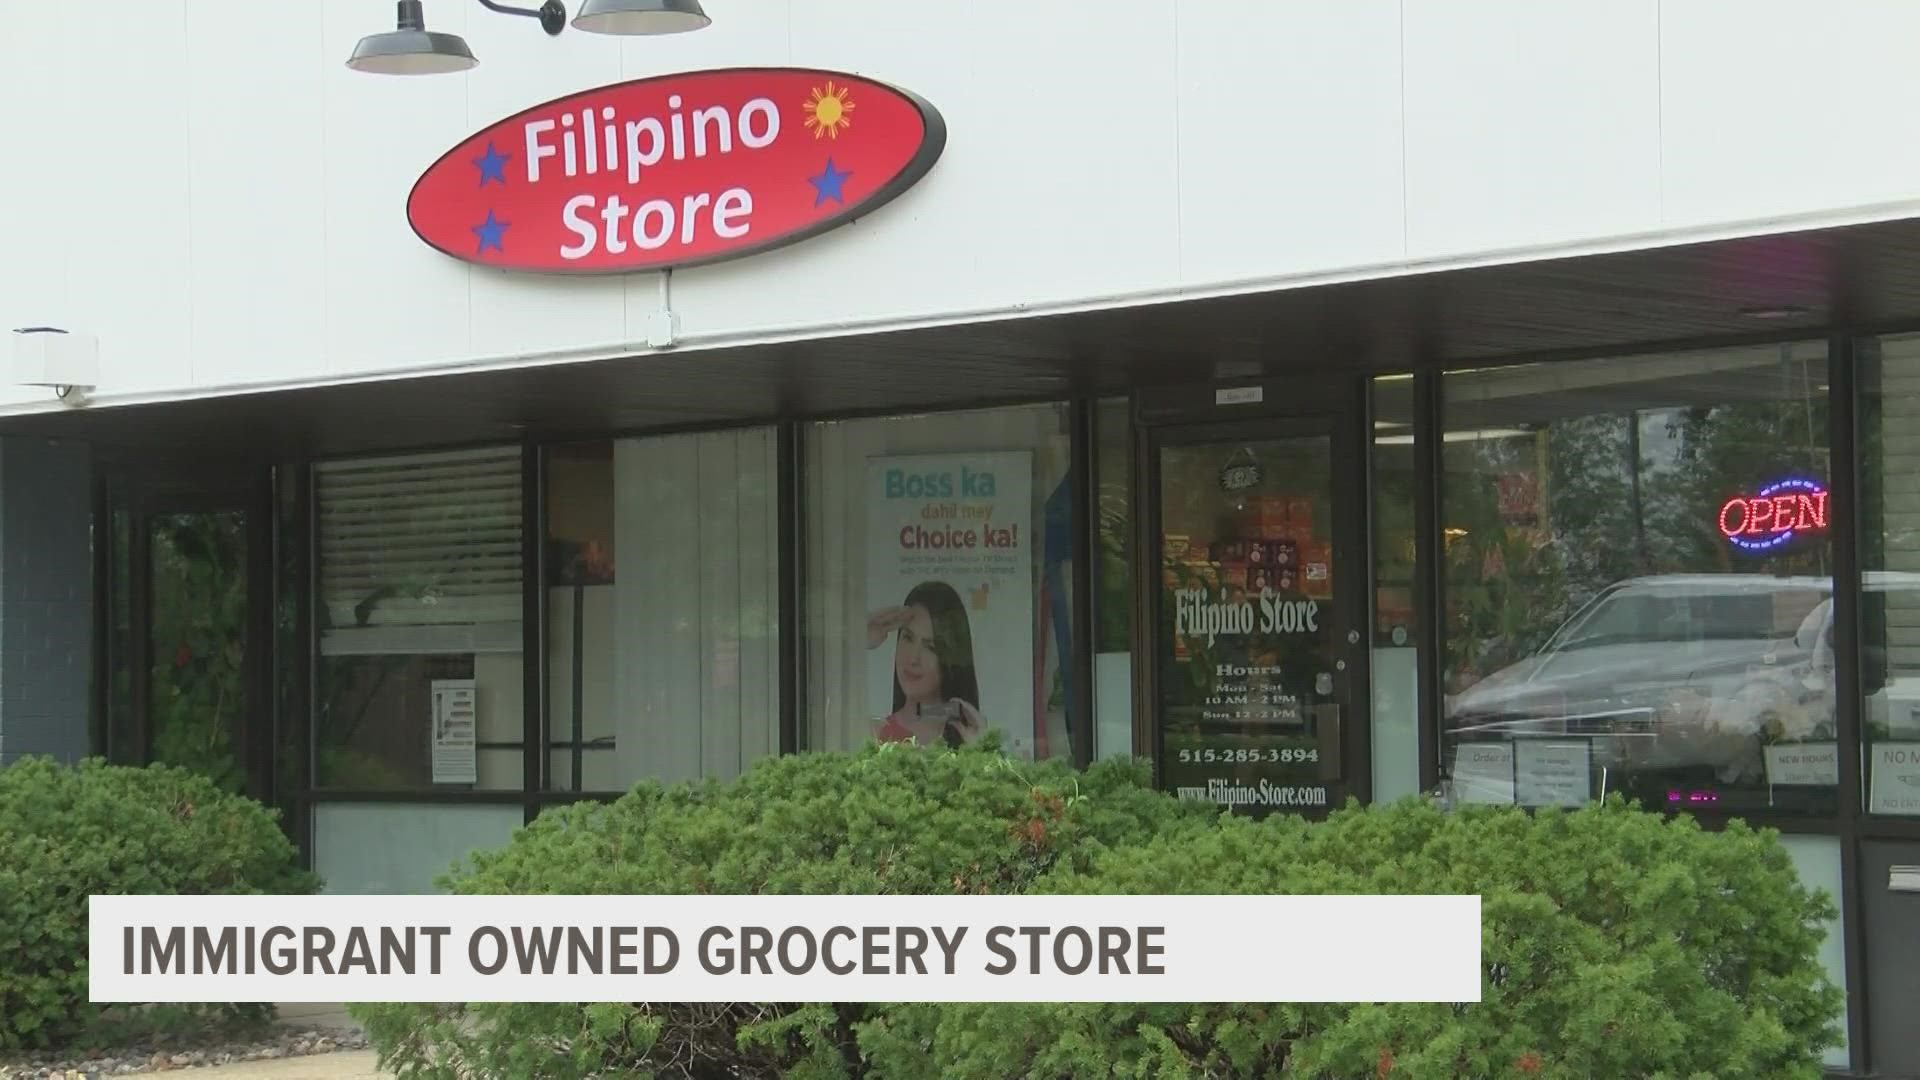 The Filipino Store on the southside of Des Moines has been open since the early 2000s. The owner said she and her husband opened it to fill a need in the community.